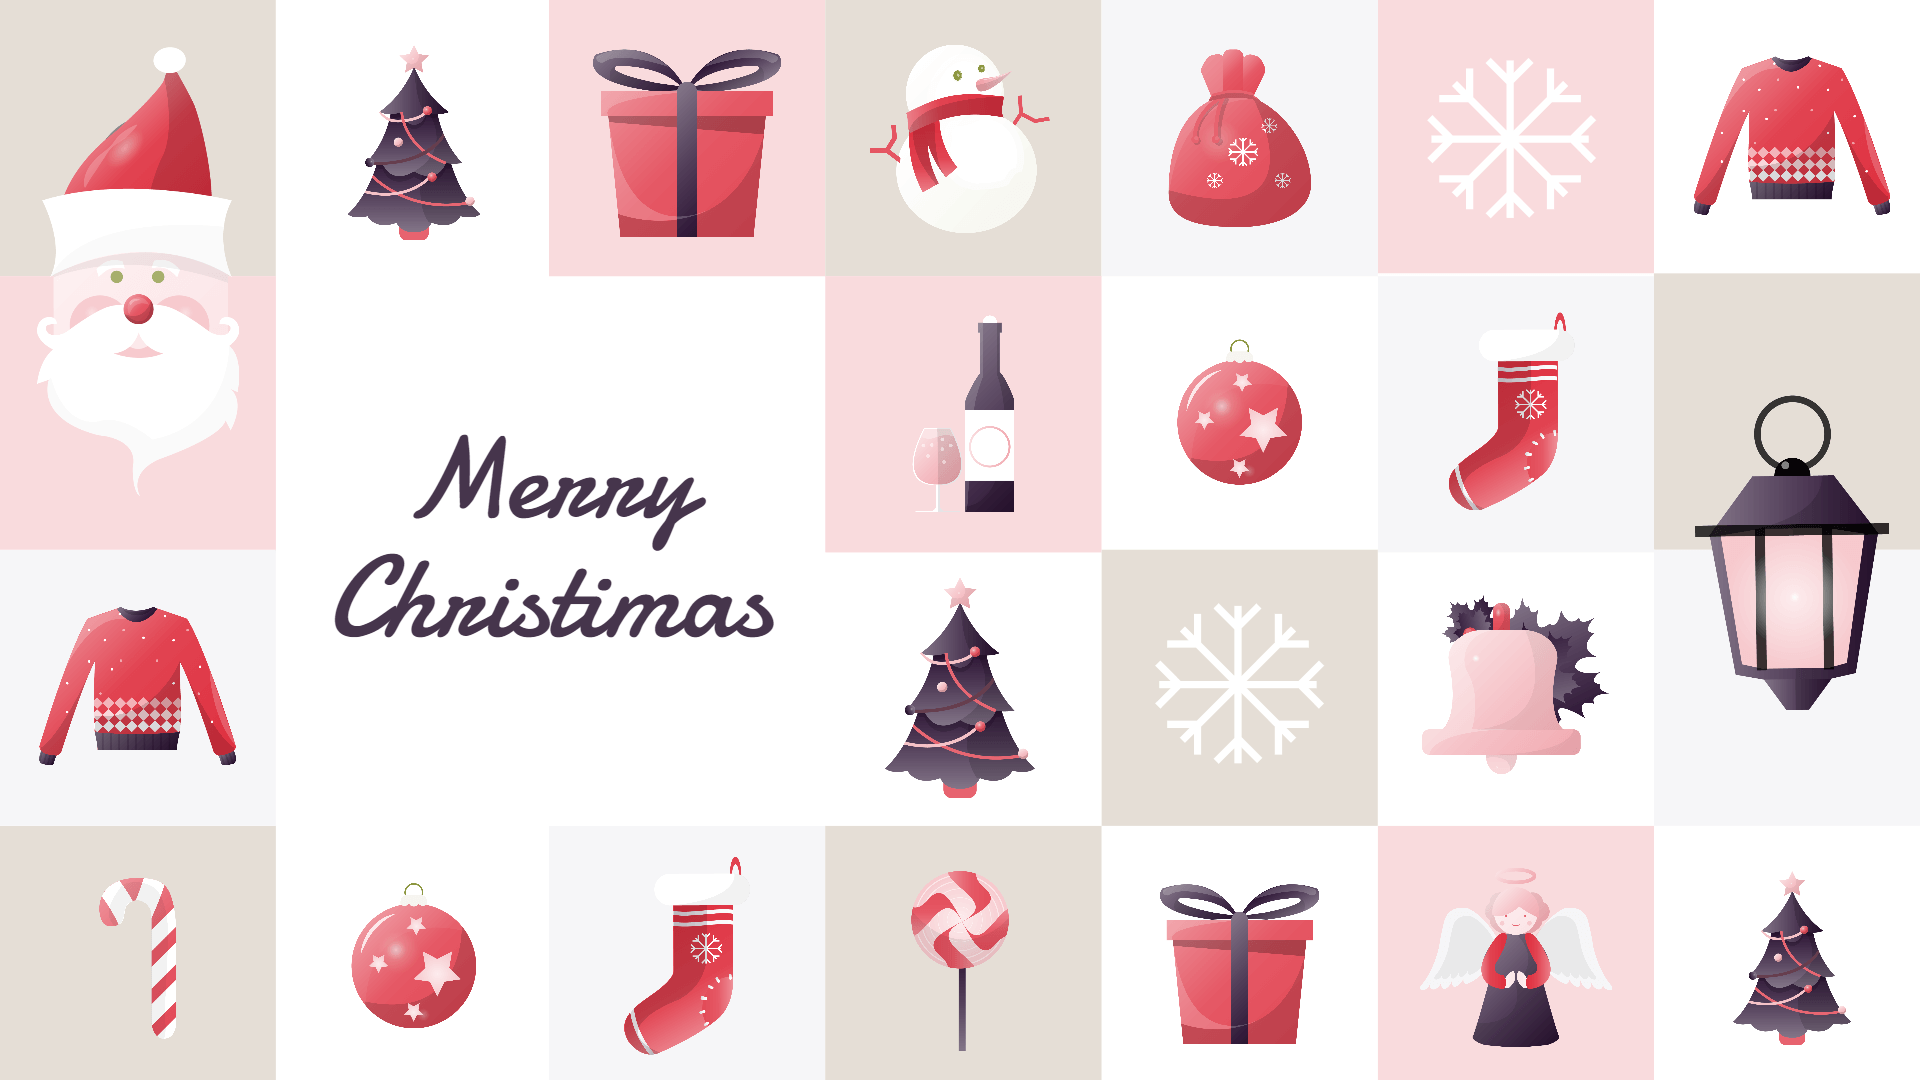 Christmas Wallpaper & Background for Your Holiday Celebration